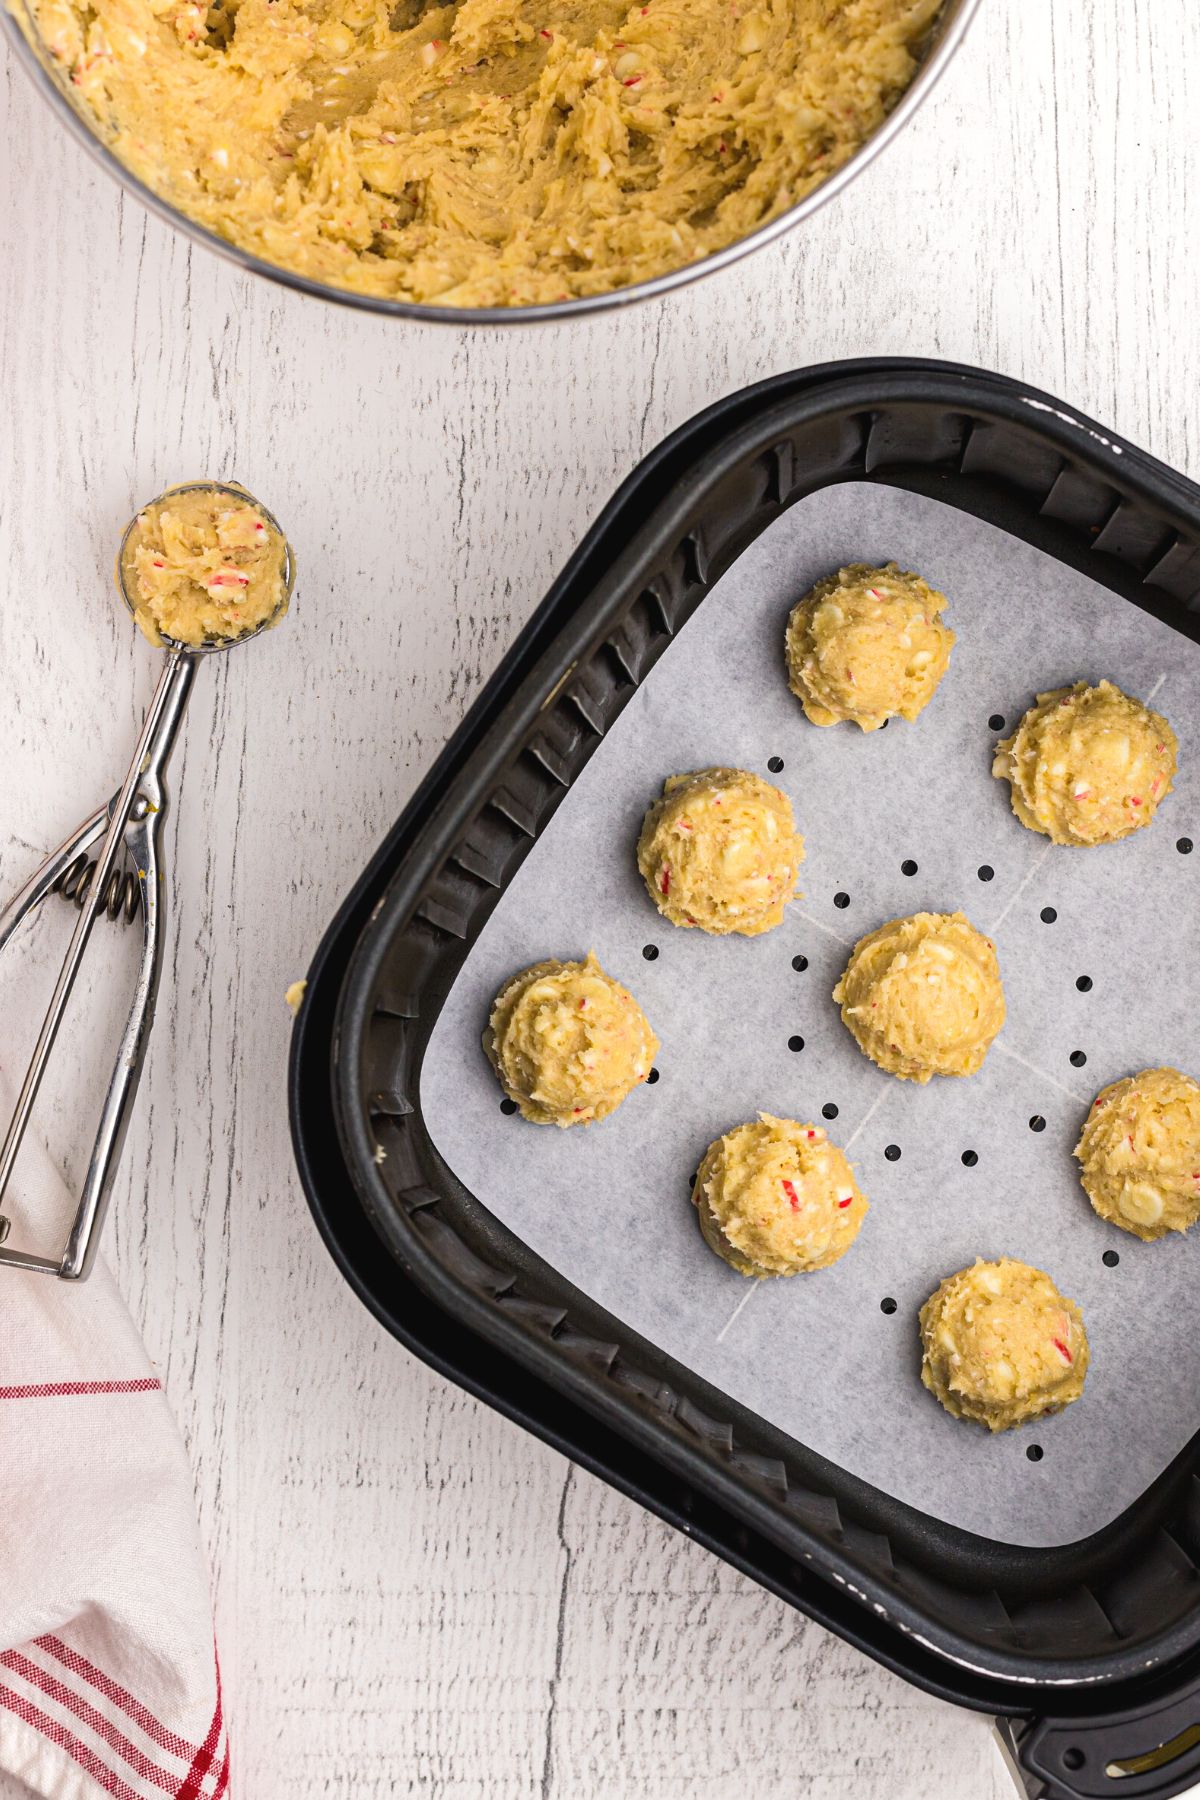 Cookie dough being scooped into air fryer basket